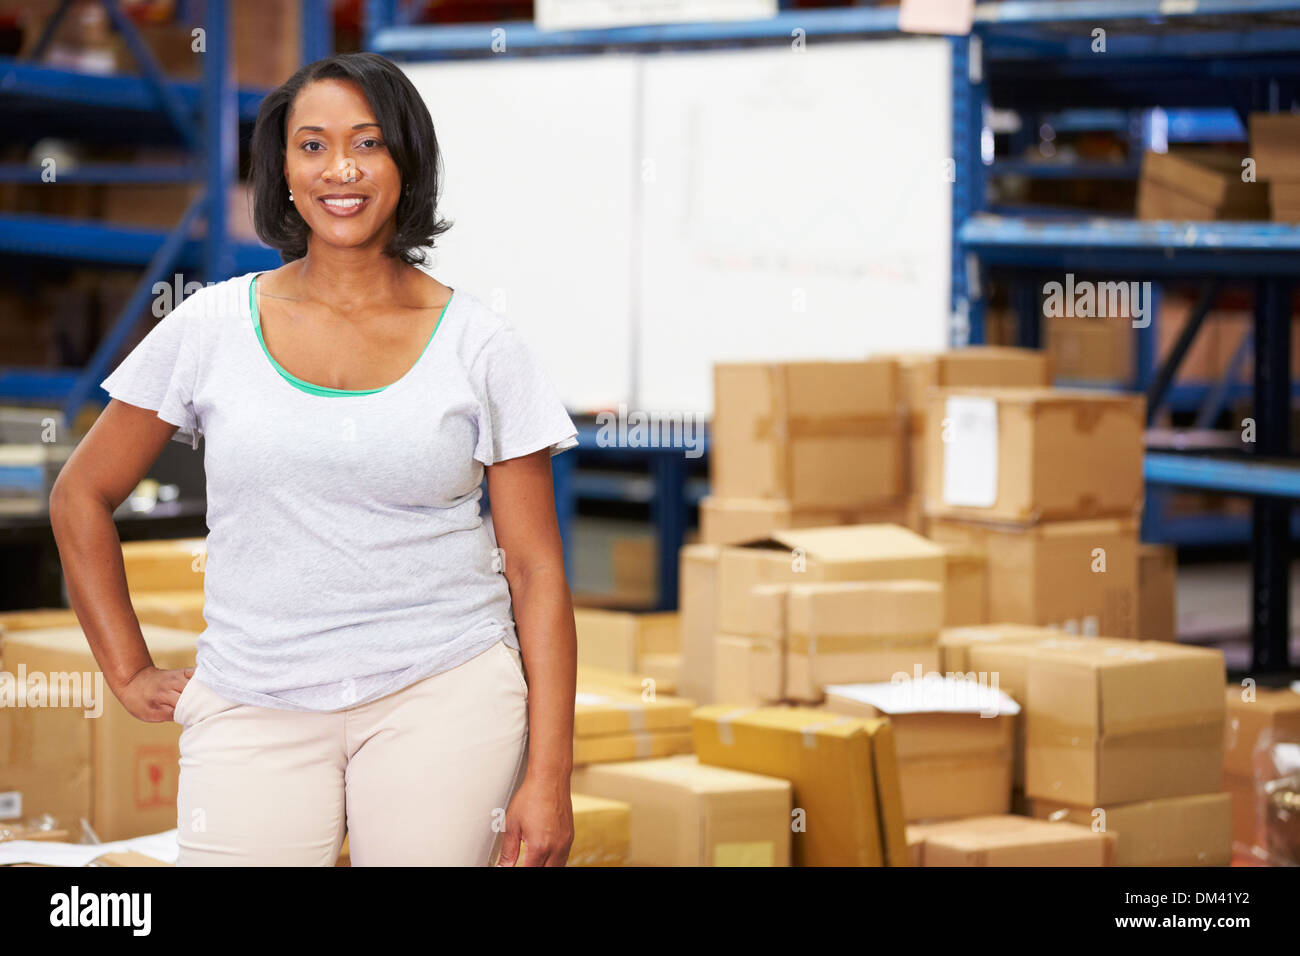 Portrait Of Worker In Distribution Warehouse Stock Photo